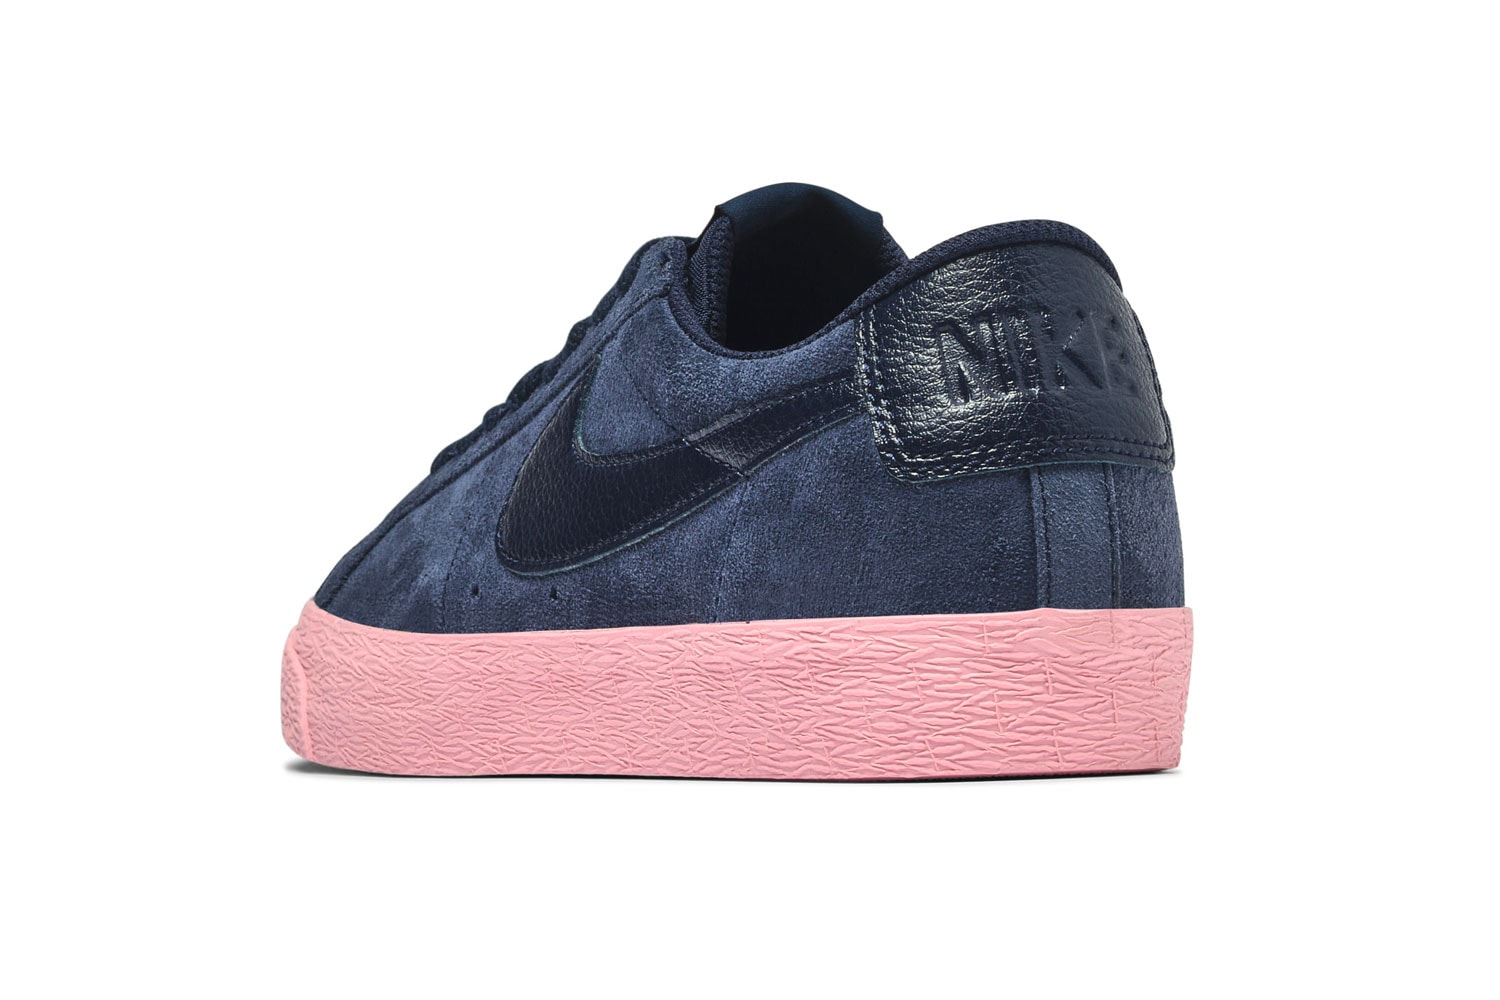 Nike SB Blazer Low "Obsidian/Bubblegum" release date price info colorway sneaker available now Navy/Pink